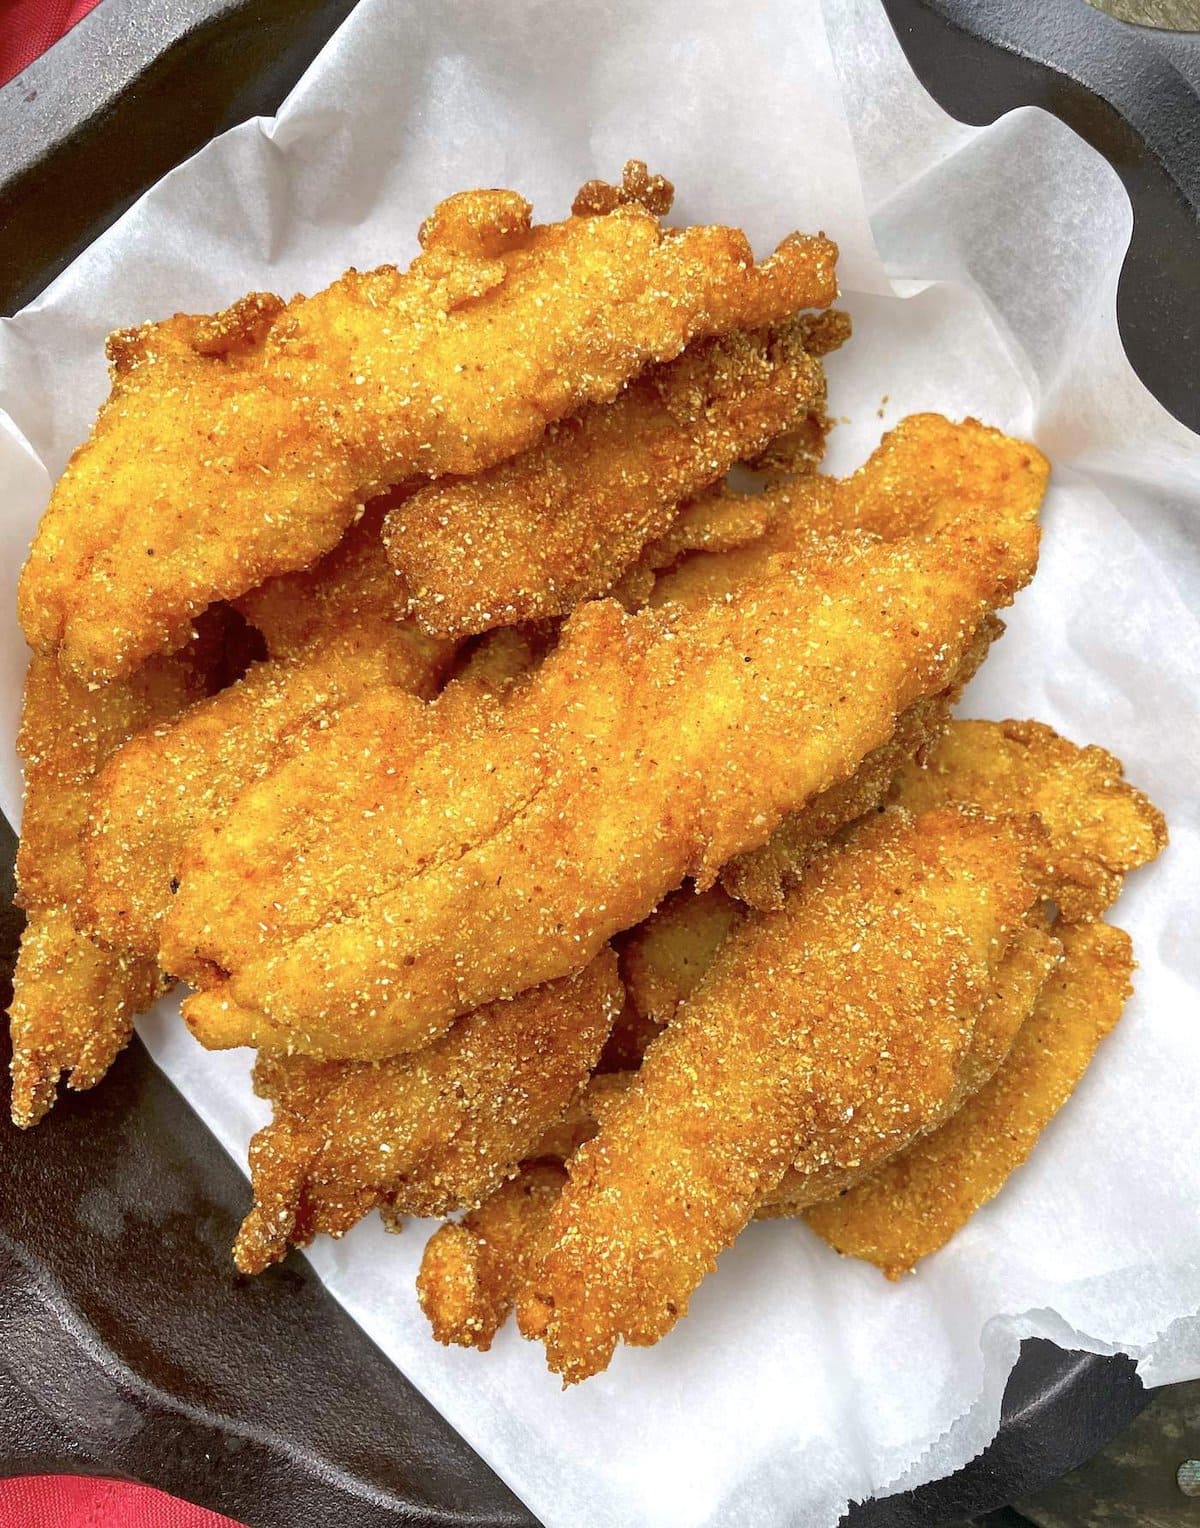 A pile of cornmeal breaded fried fish sitting in a cast iron pan.